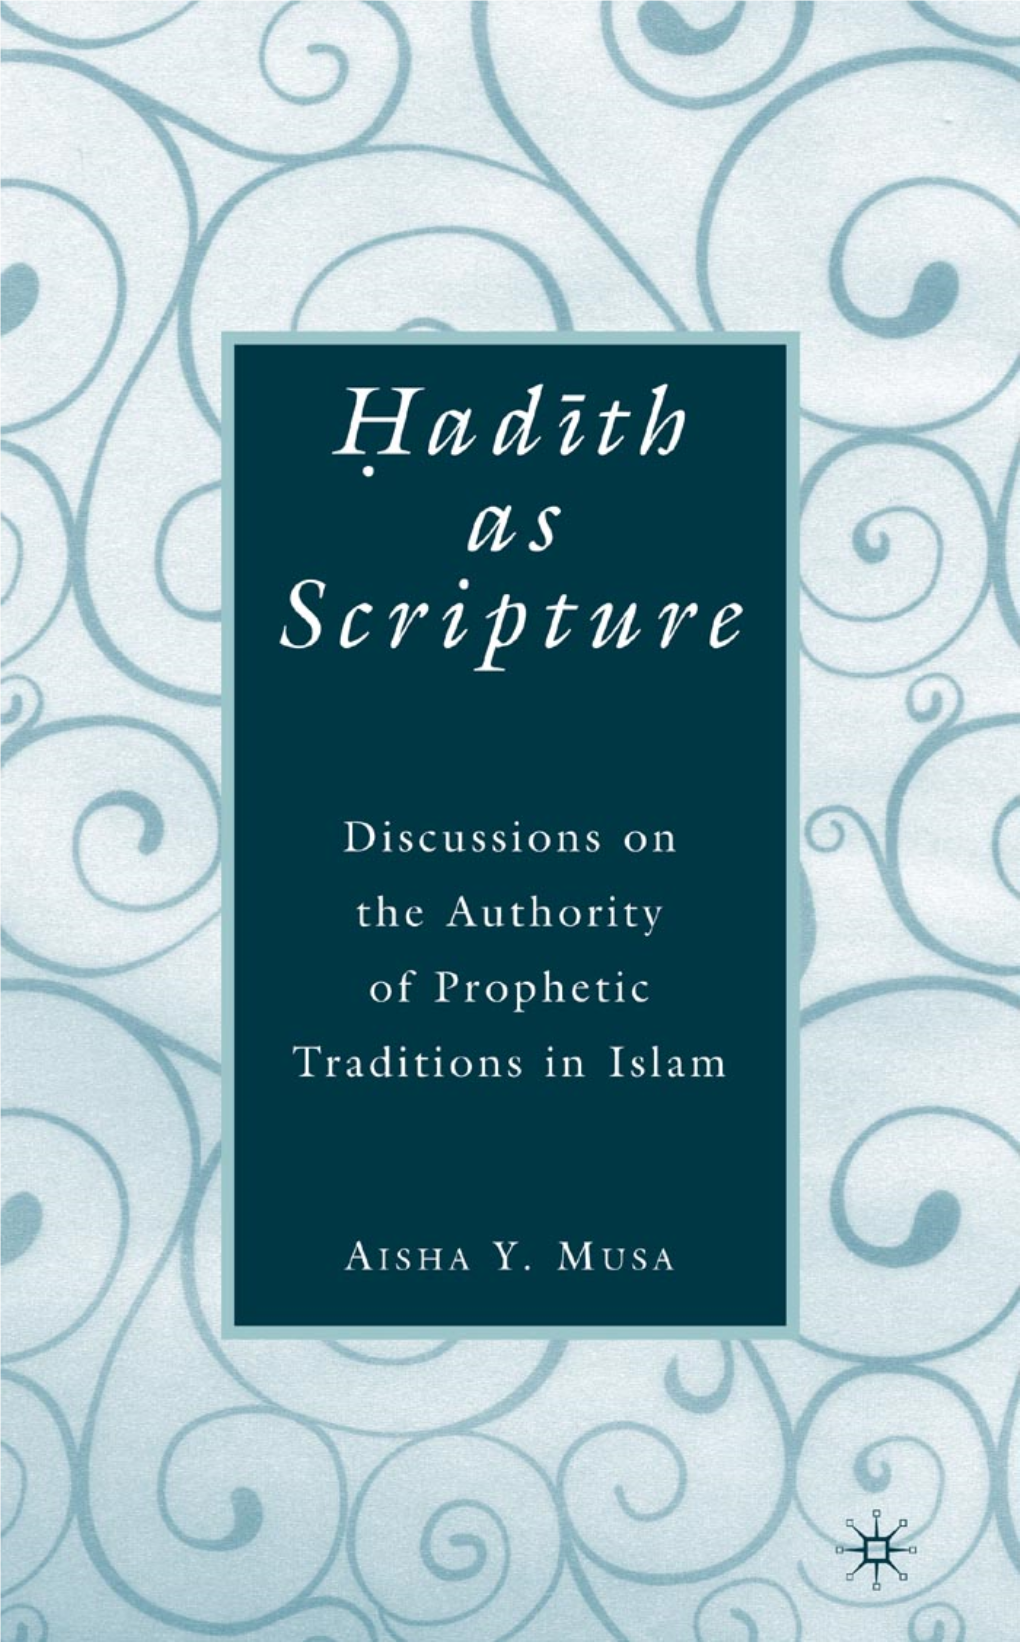 Hadith As Scripture: Discussions on the Authority of Prophetic Traditions